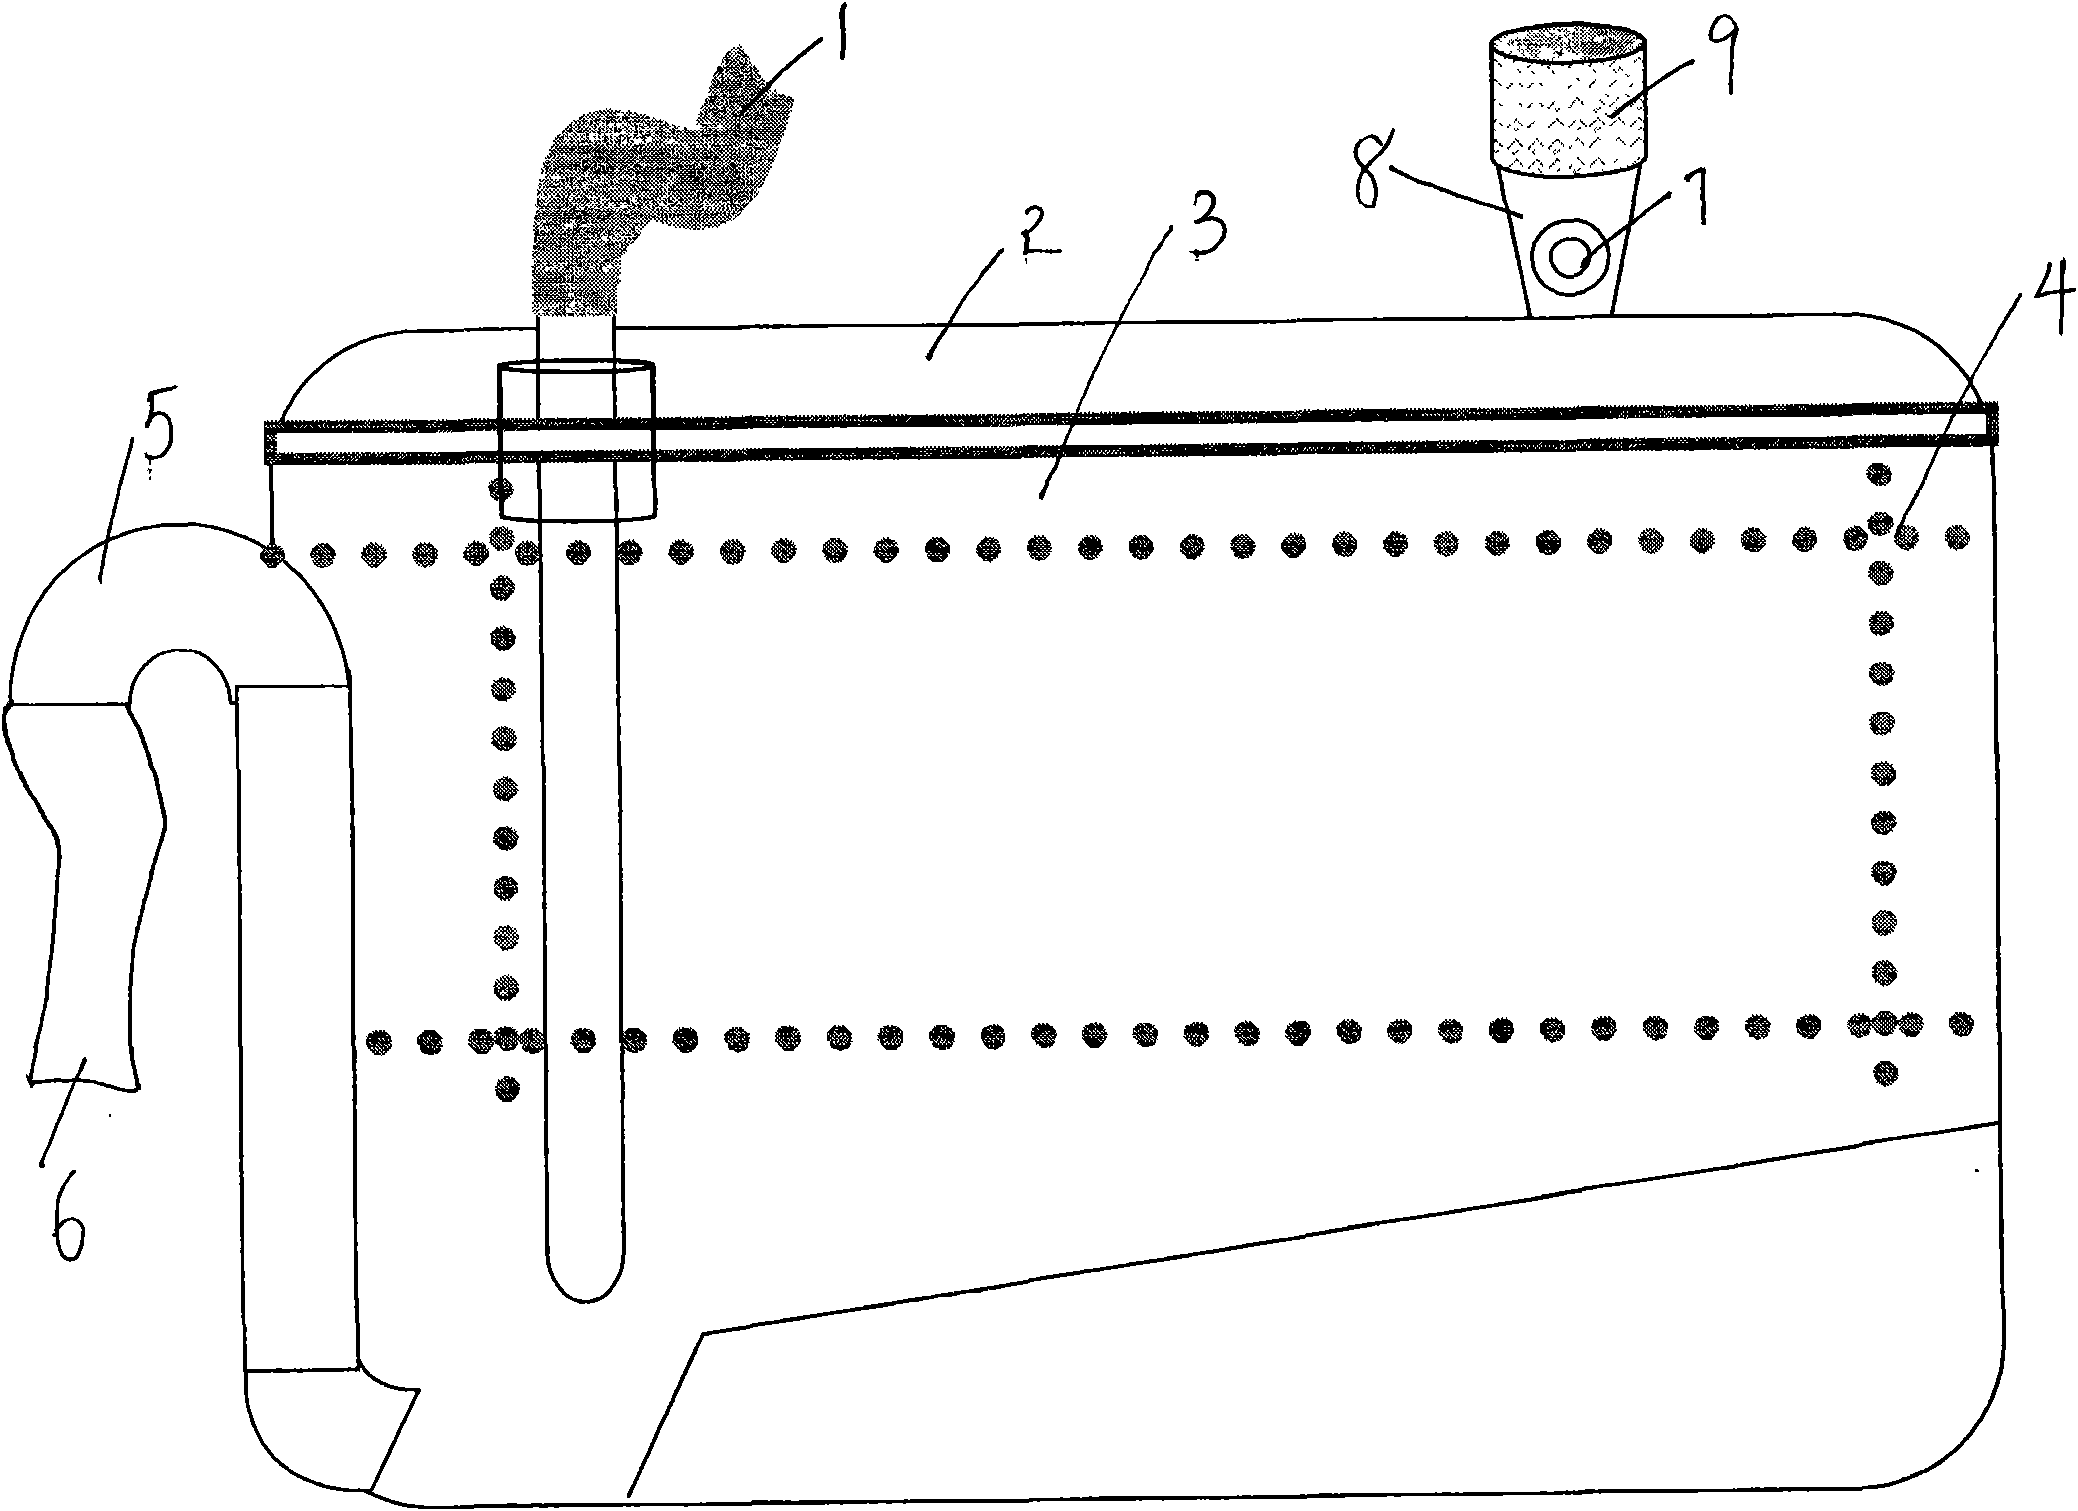 Device for preventing sewer clogging